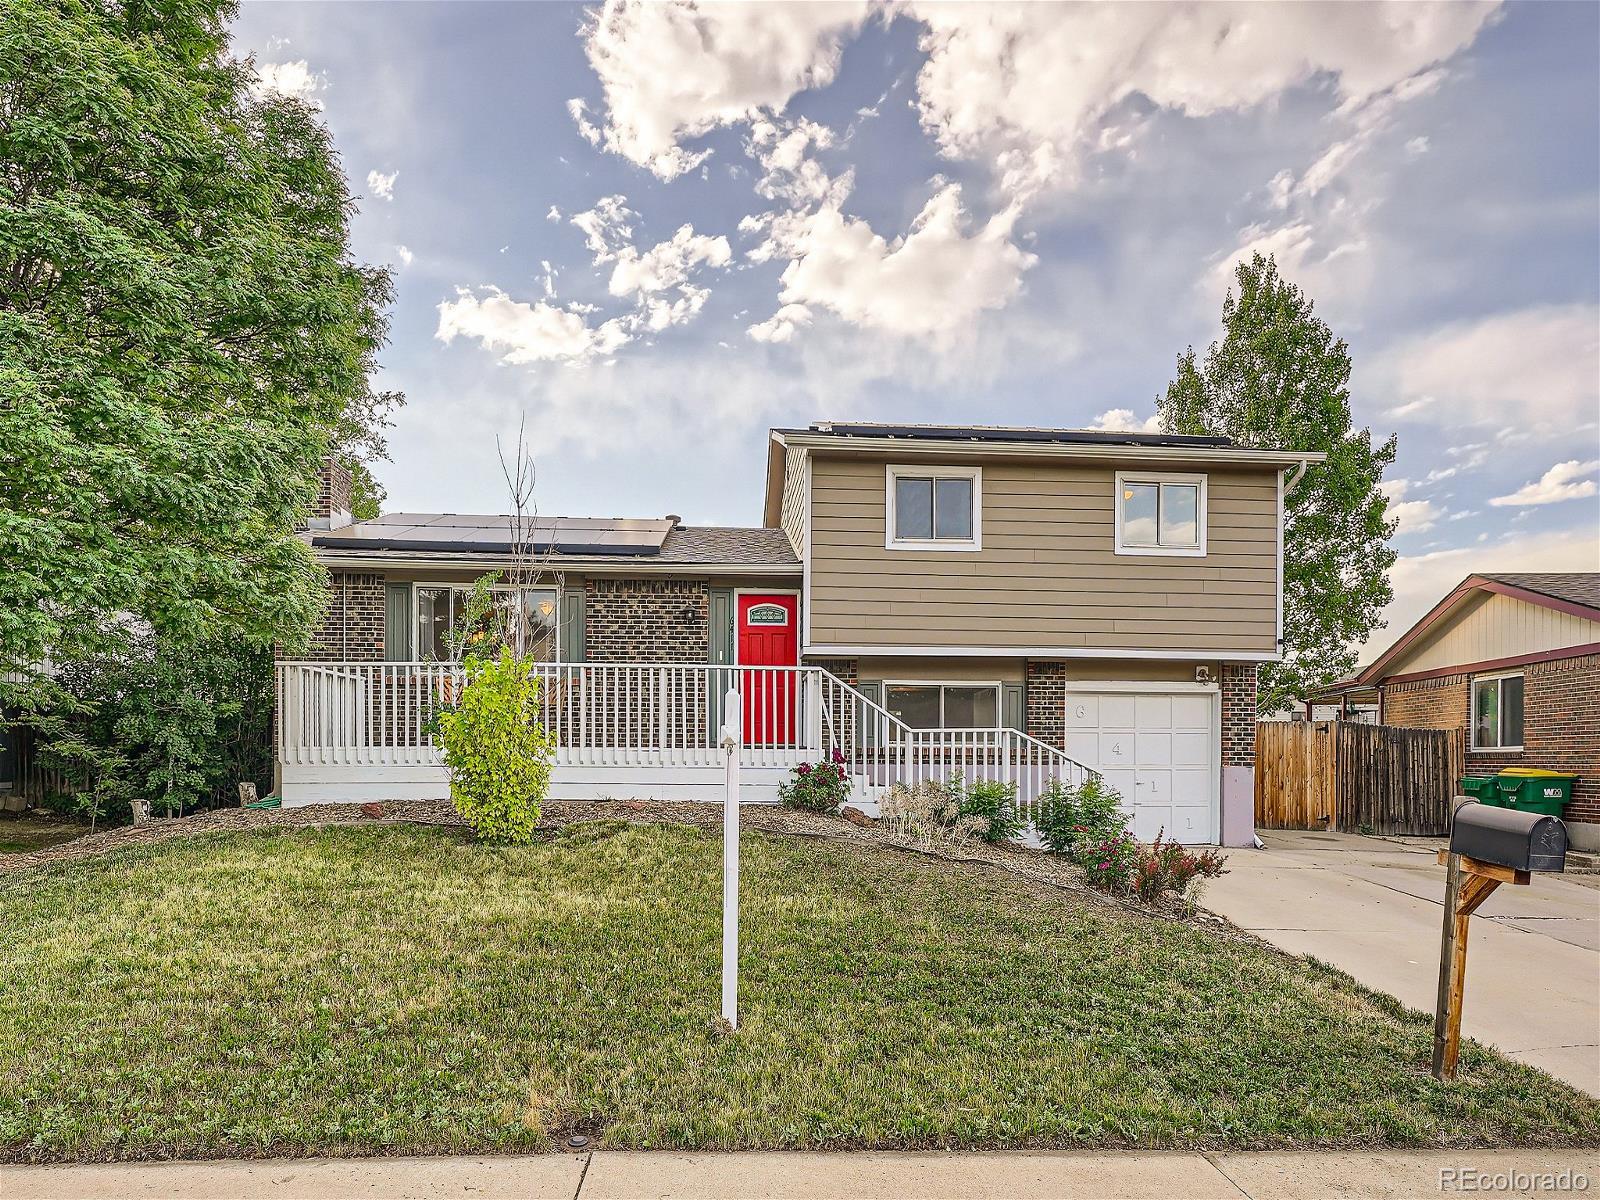 Report Image for 6411 W 110th Place,Westminster, Colorado